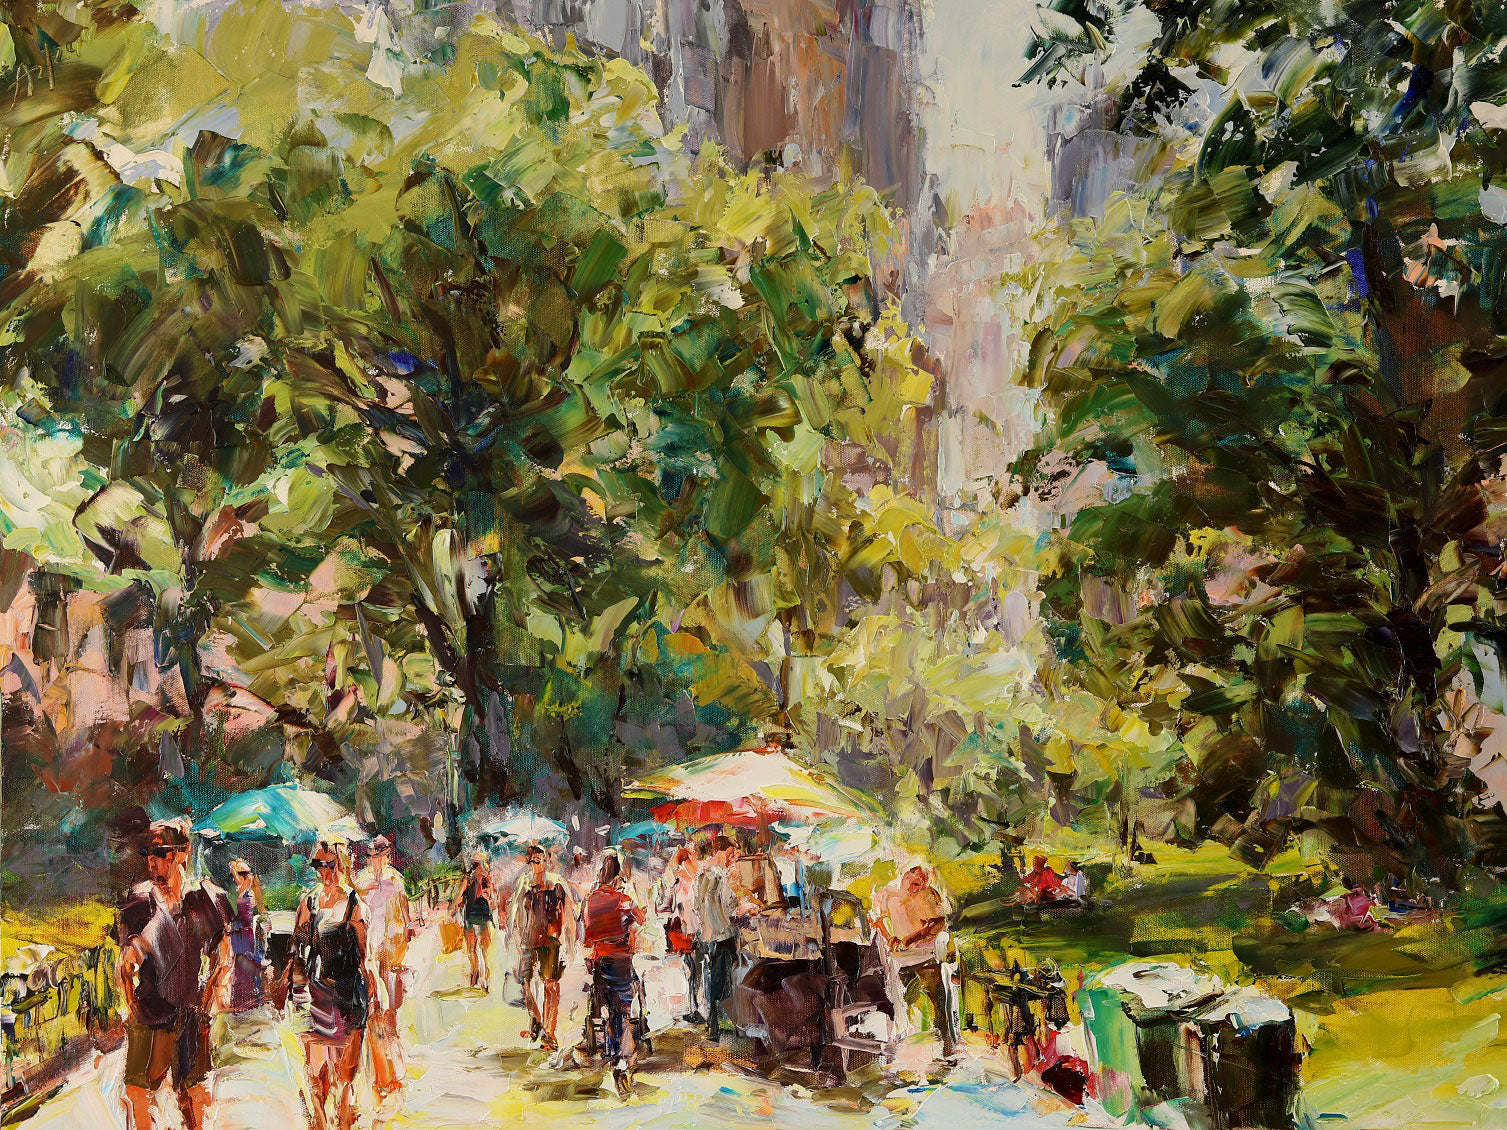 Summer in Central Park original oil painting by artist Lyudmila Agrich